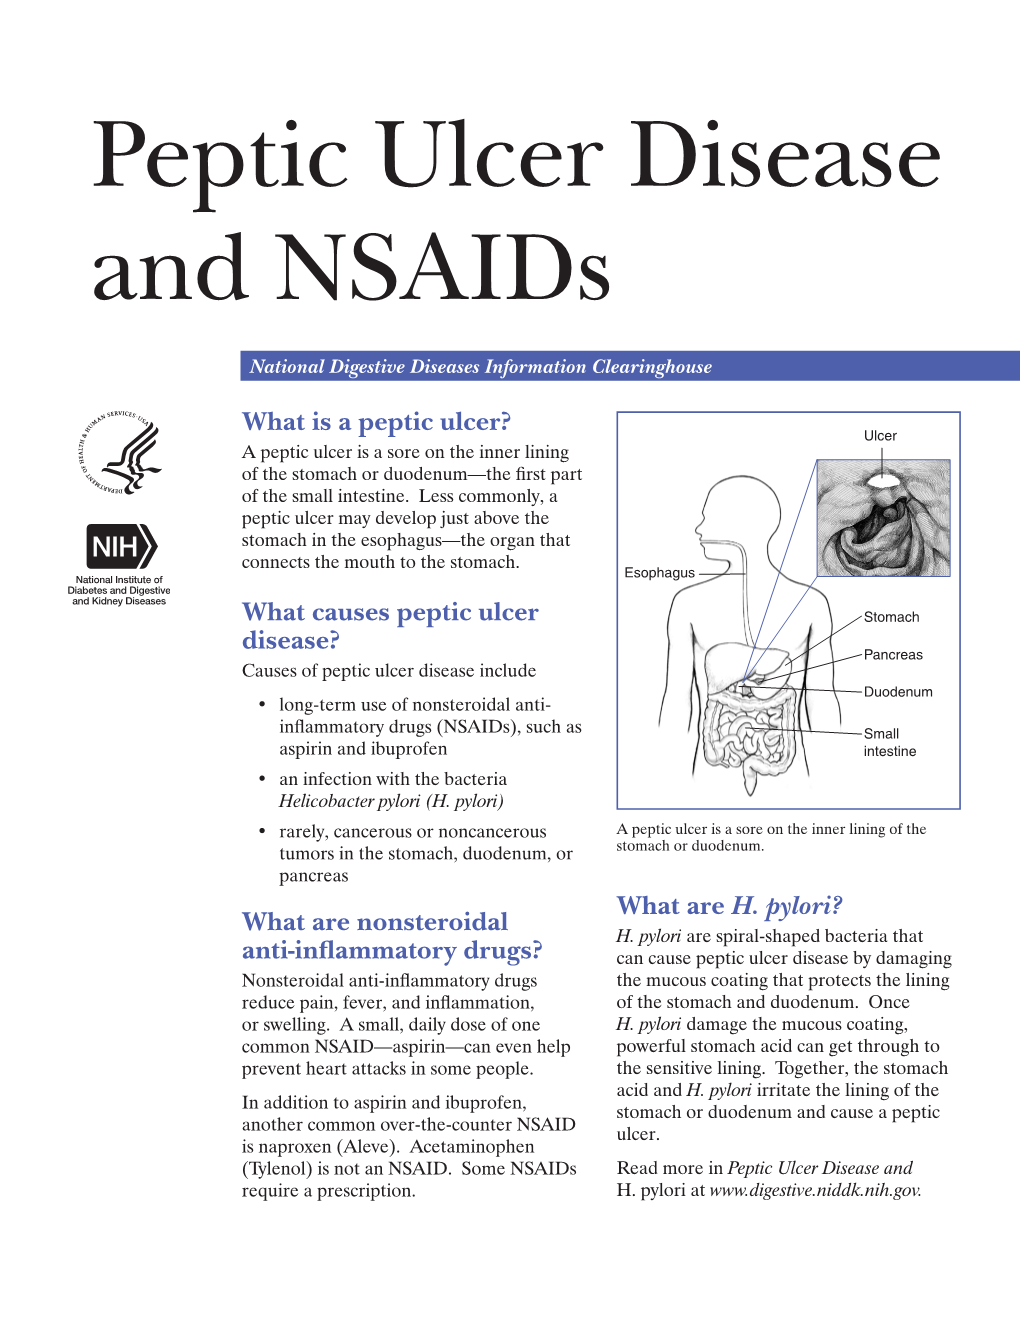 Peptic Ulcer Disease and Nsaids